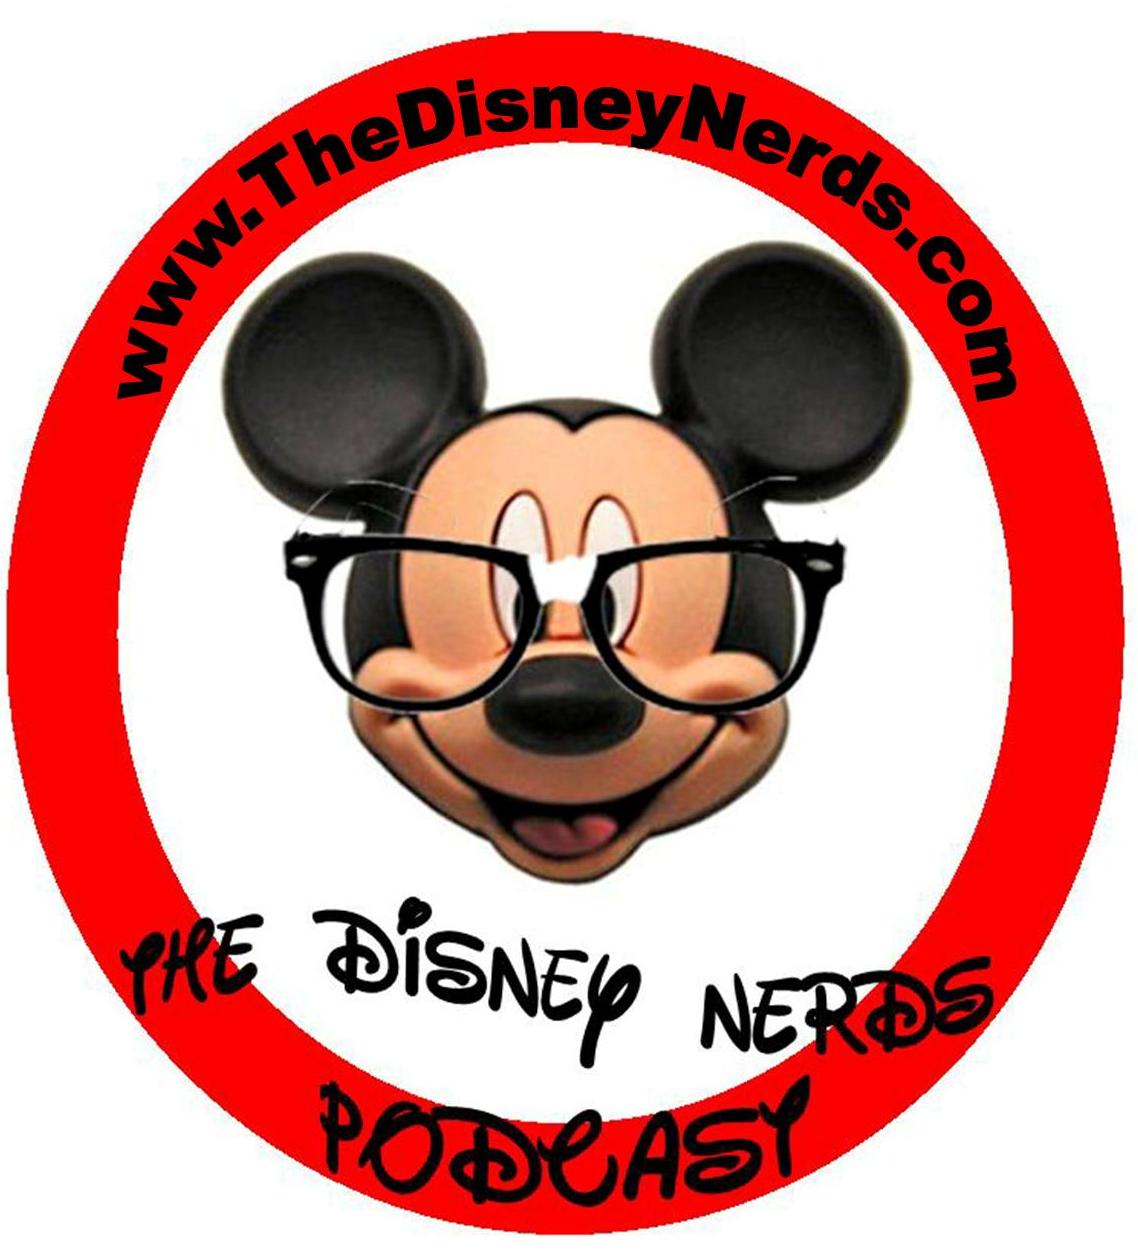 Show # 39 of the Disney Nerds Podcast